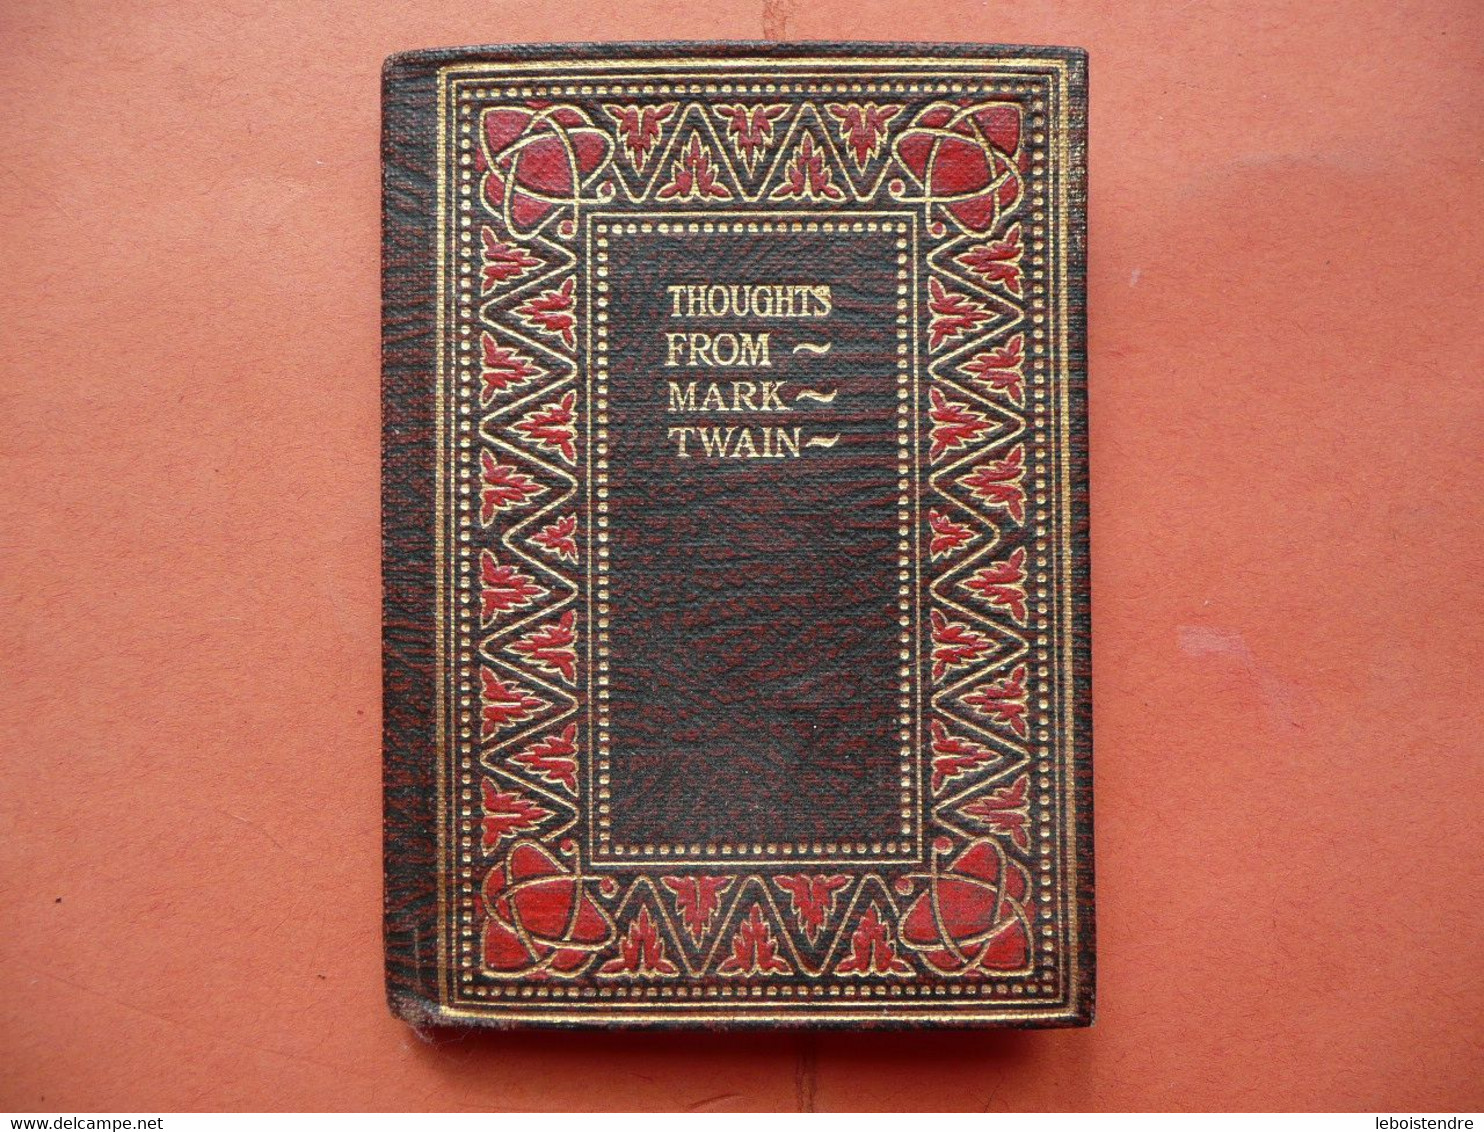 THOUGHTS FROM MARK TWAIN SELECTED BY ELSIE E. MORTON SESAME BOOKLETS MINIATURE - Literatur